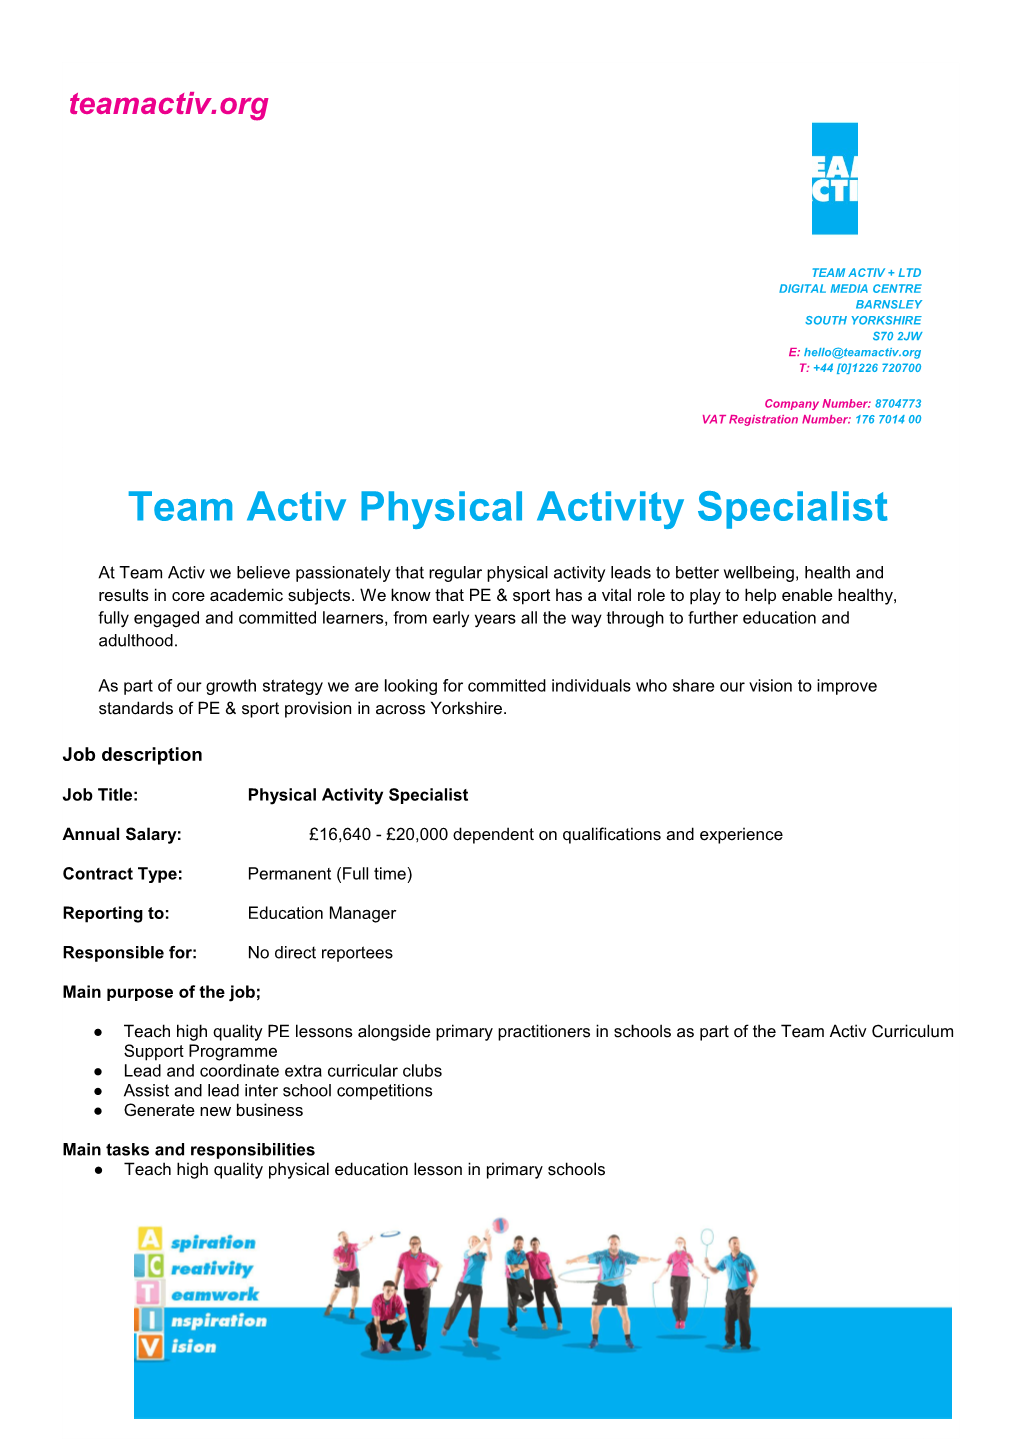 Team Activ Physical Activity Specialist